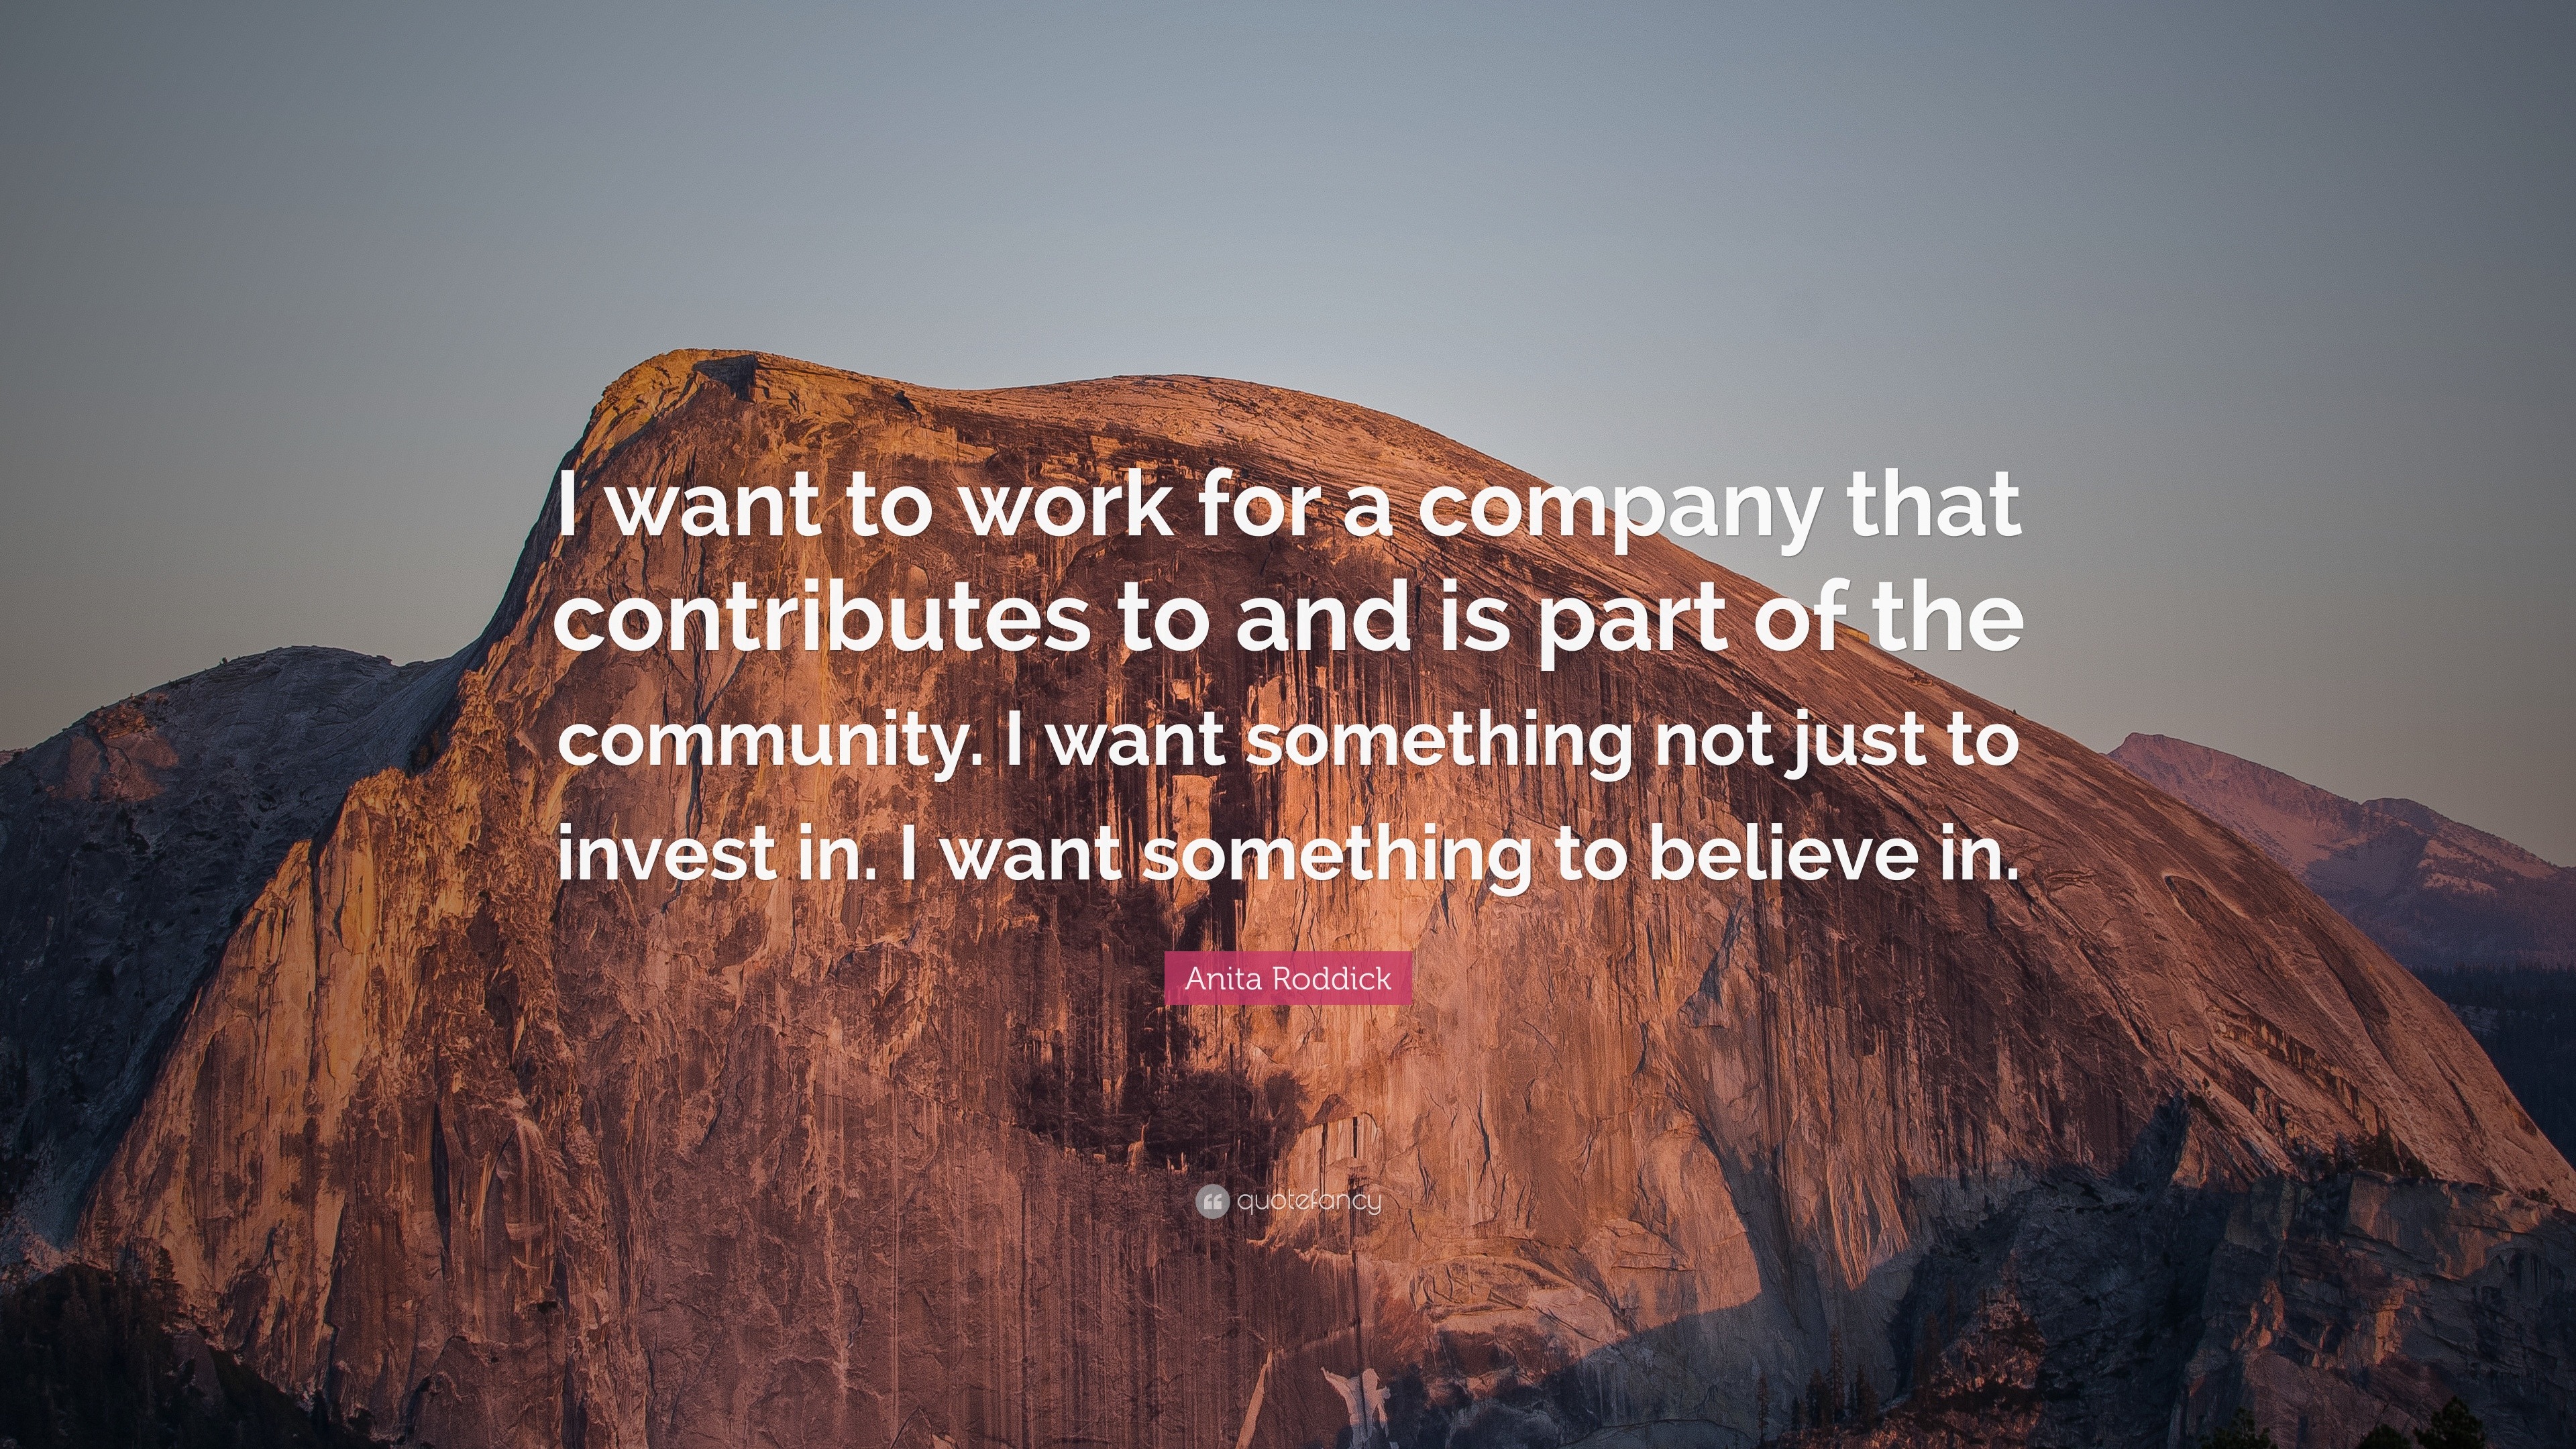 https://quotefancy.com/media/wallpaper/3840x2160/1818353-Anita-Roddick-Quote-I-want-to-work-for-a-company-that-contributes.jpg